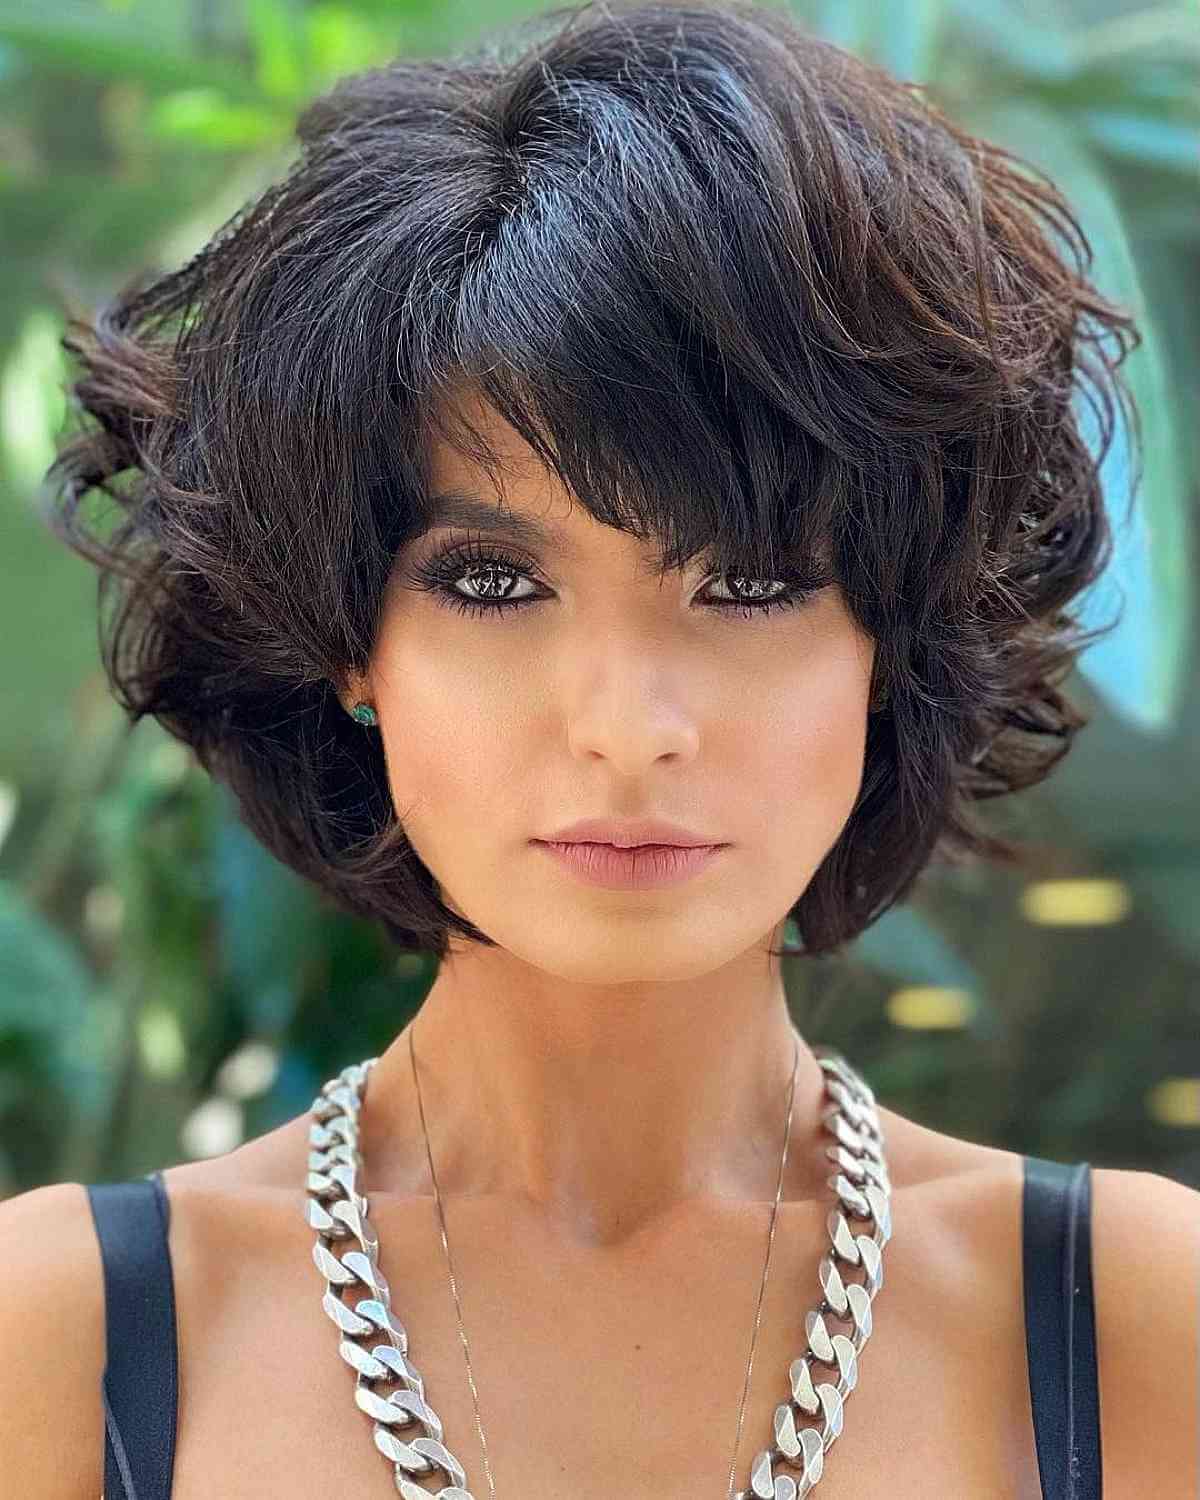 Jaw-length layered cut with bangs for very thick, fluffy hair